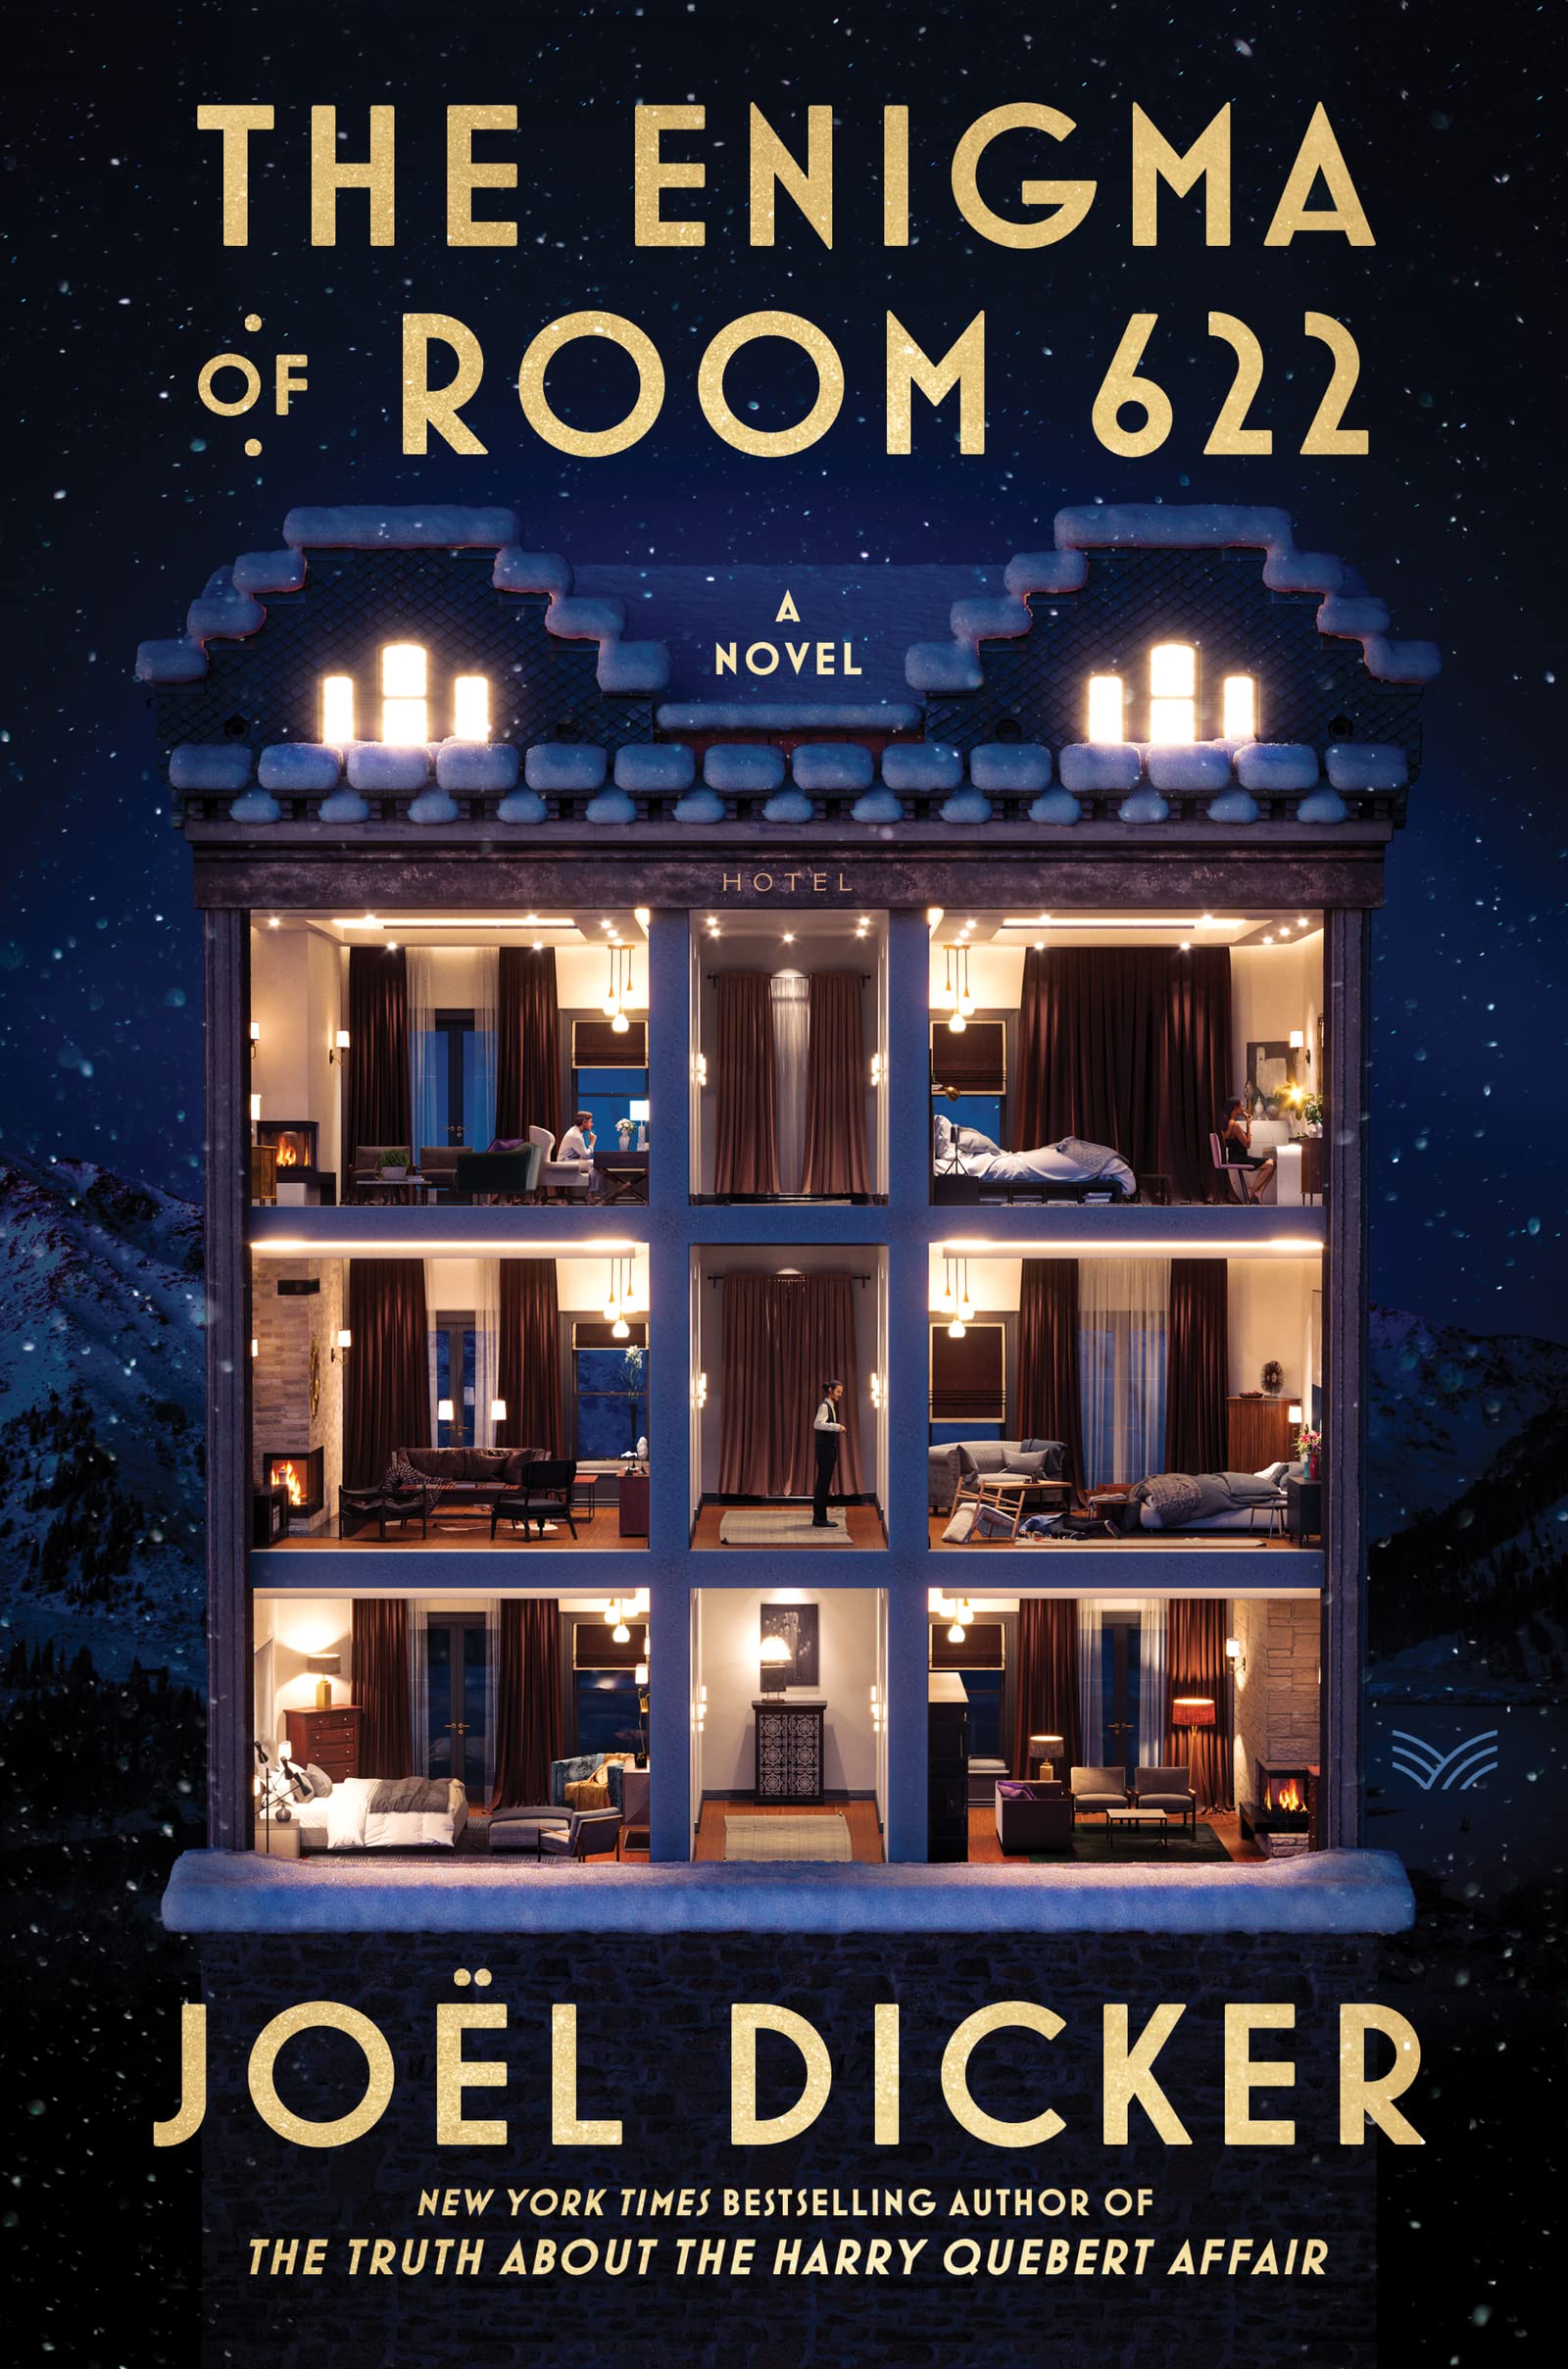 Enigma of Room 622